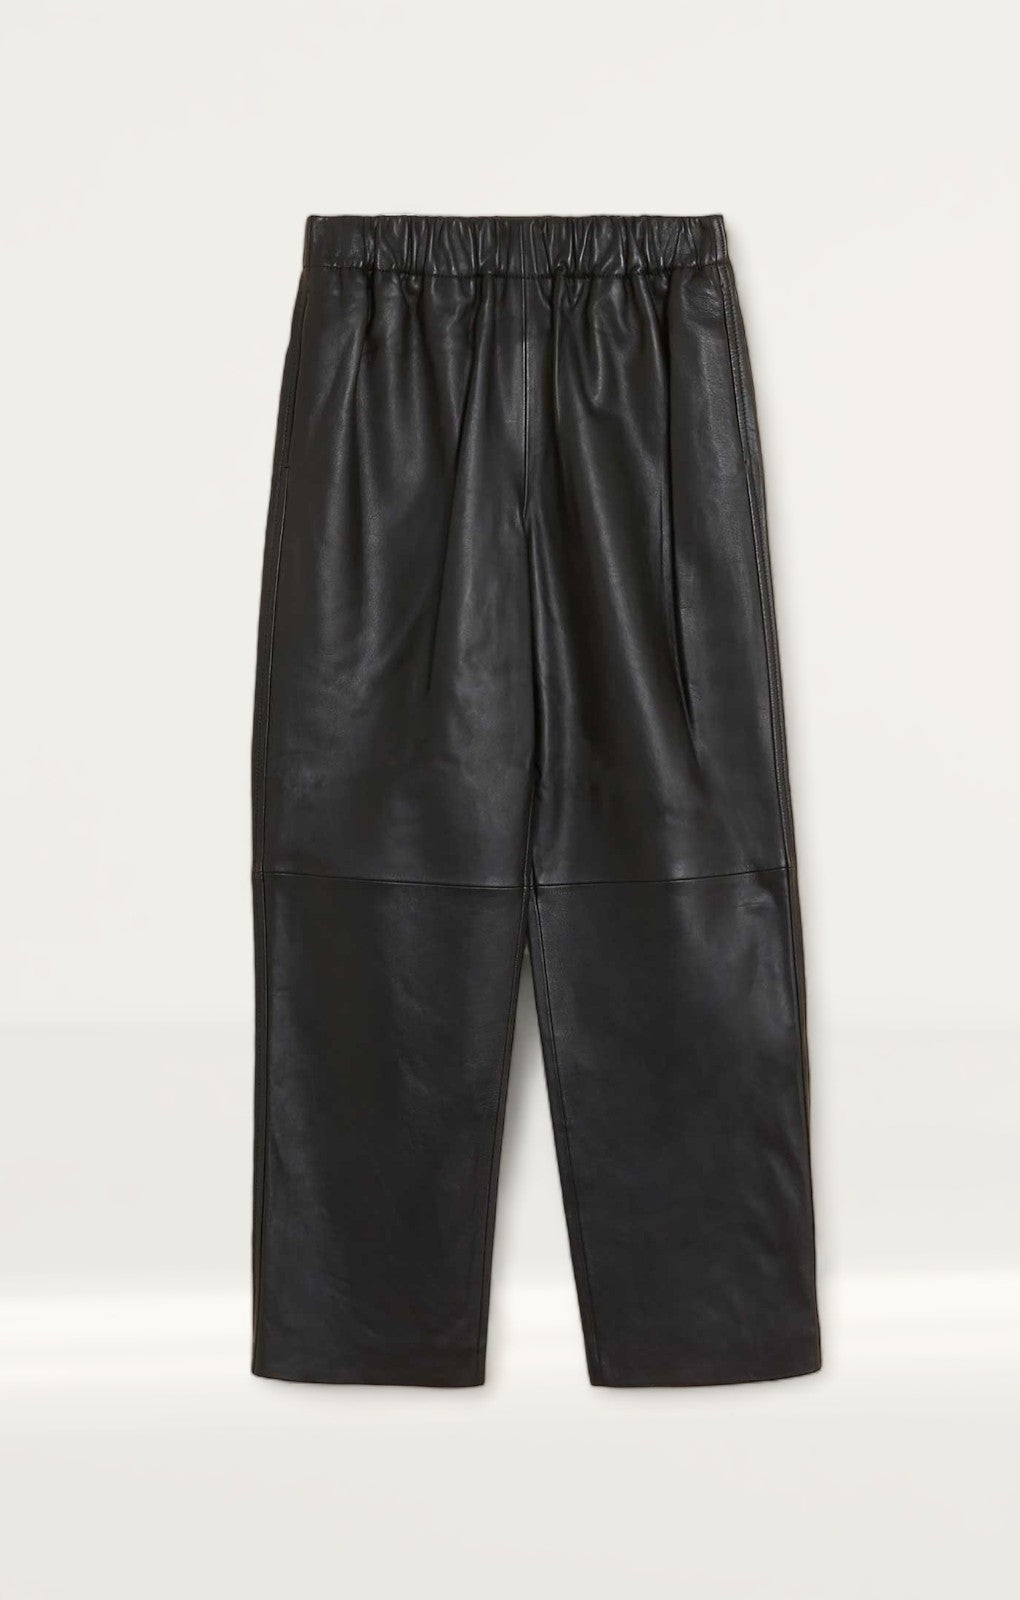 M&S Leather Straight Leg Ankle Grazer Trousers product image